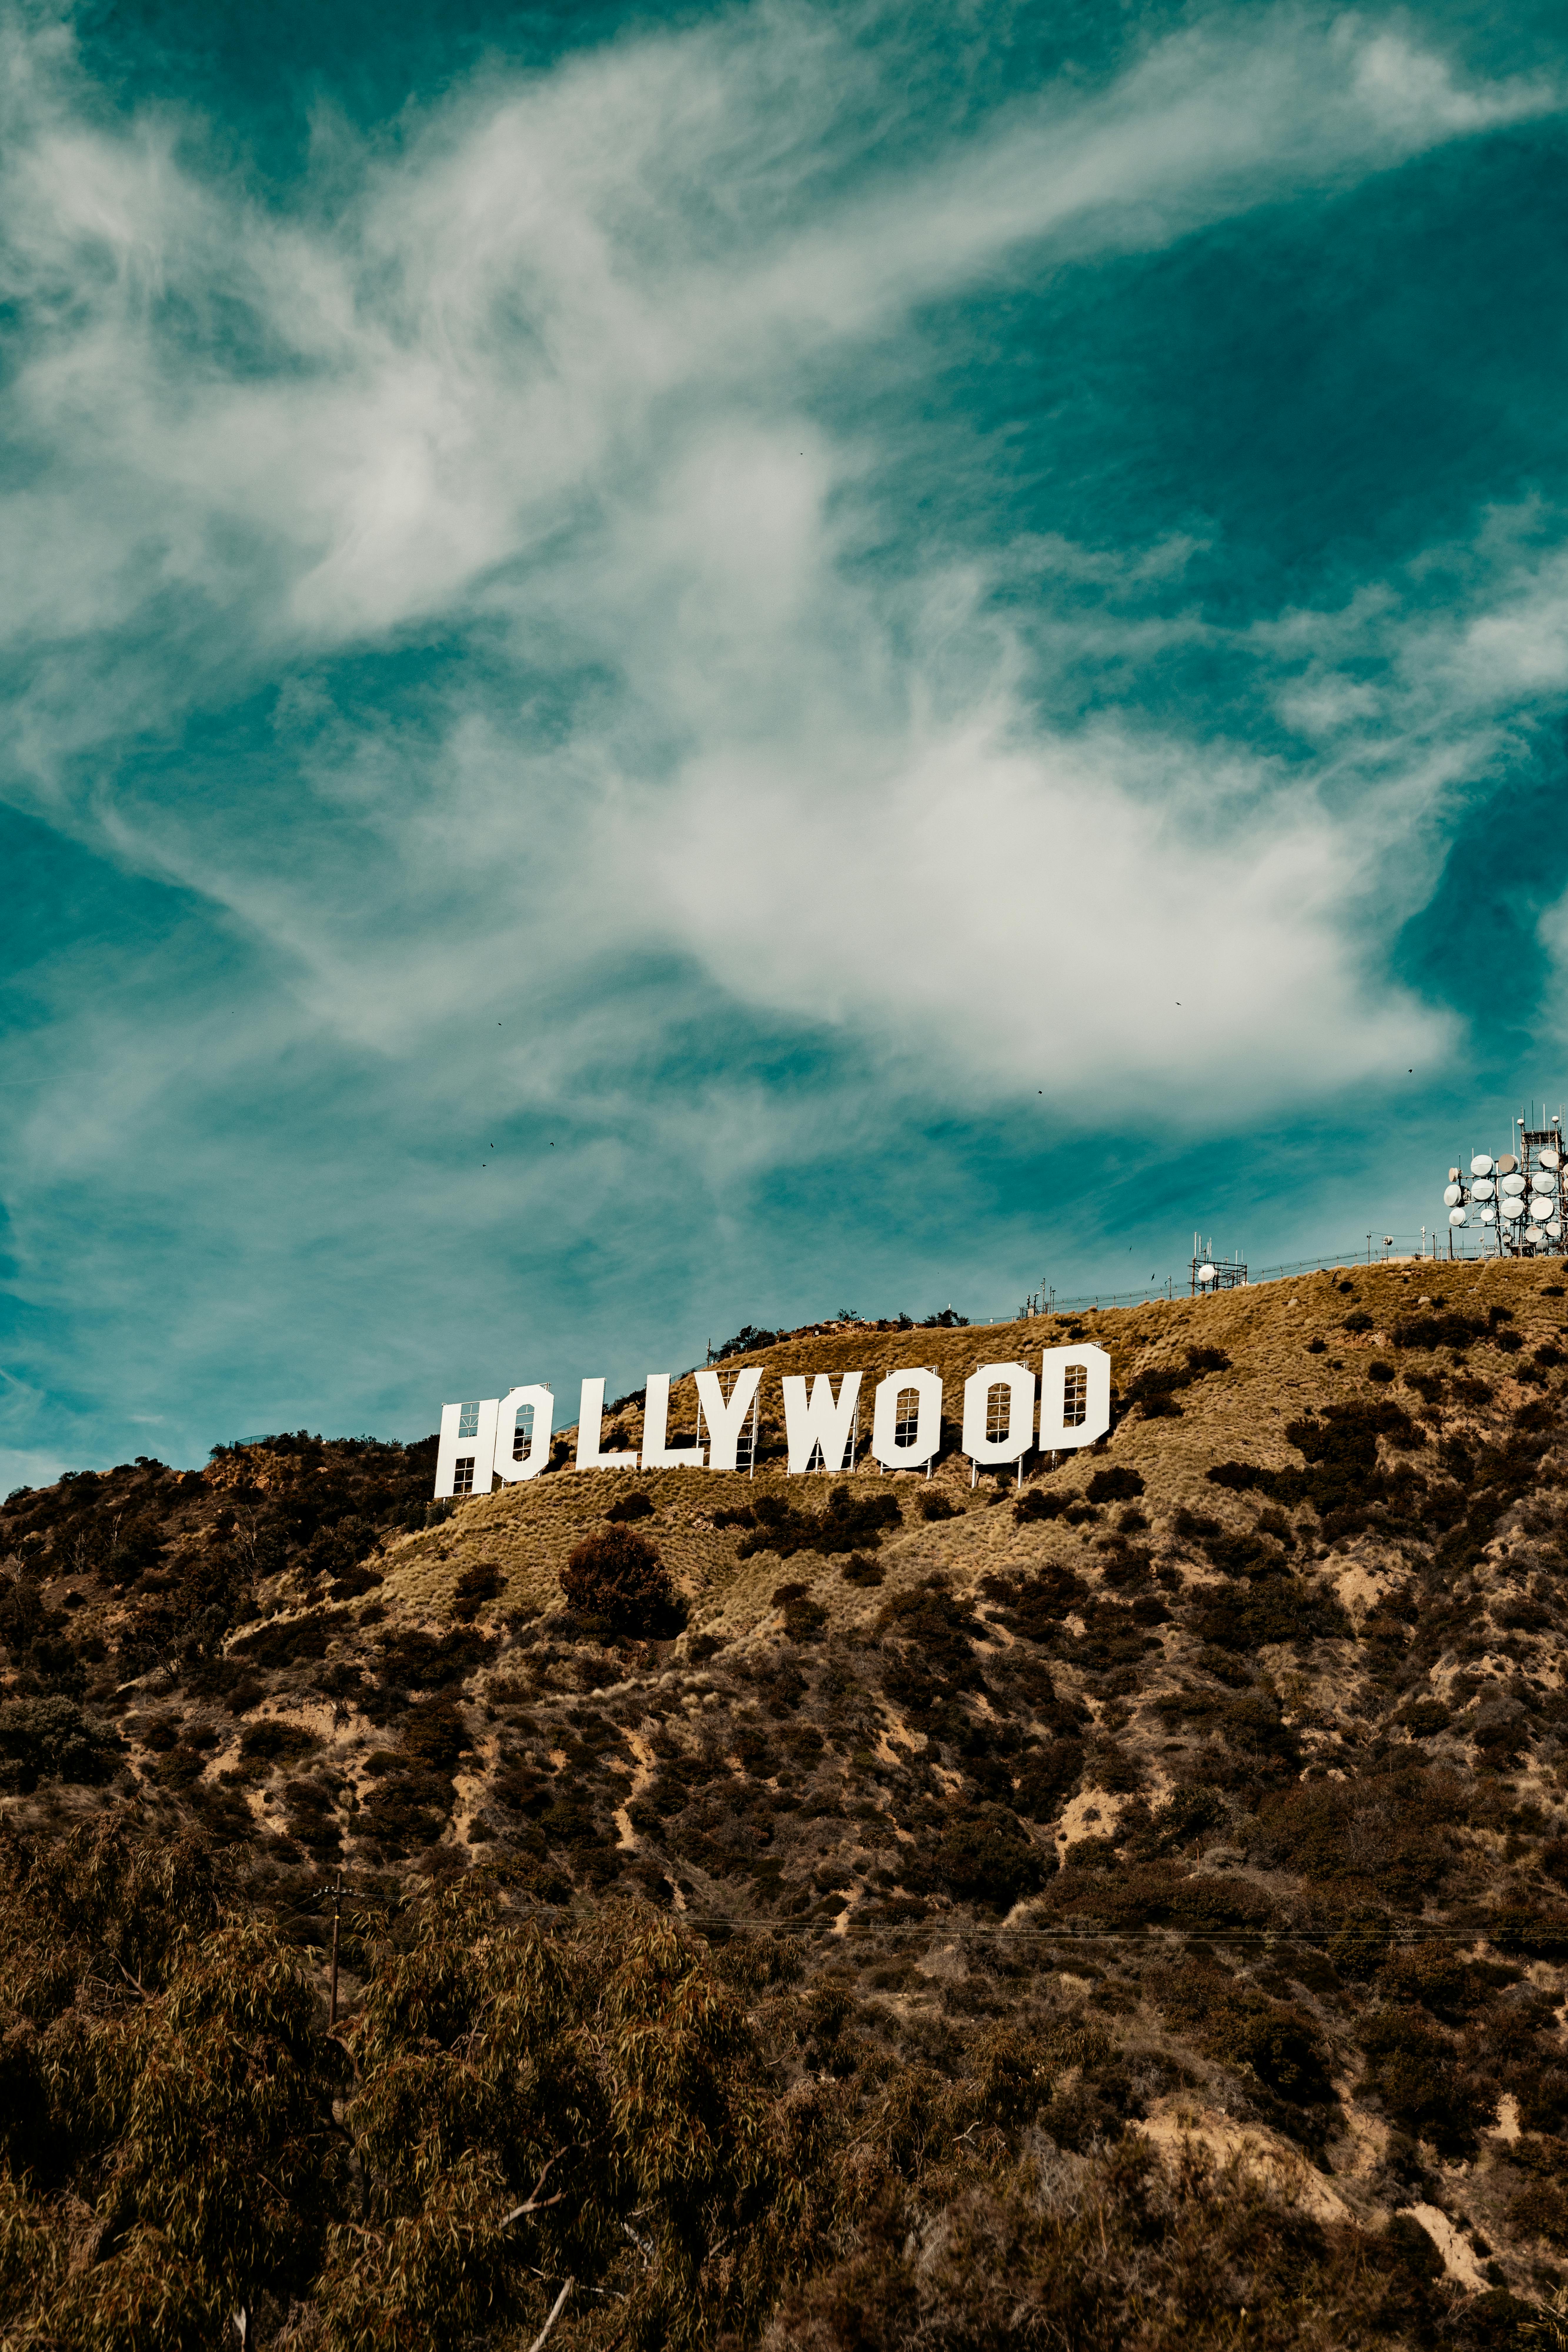  Hollywood Hintergrundbild 5333x8000. Hollywood Sign Photo, Download The BEST Free Hollywood Sign & HD Image